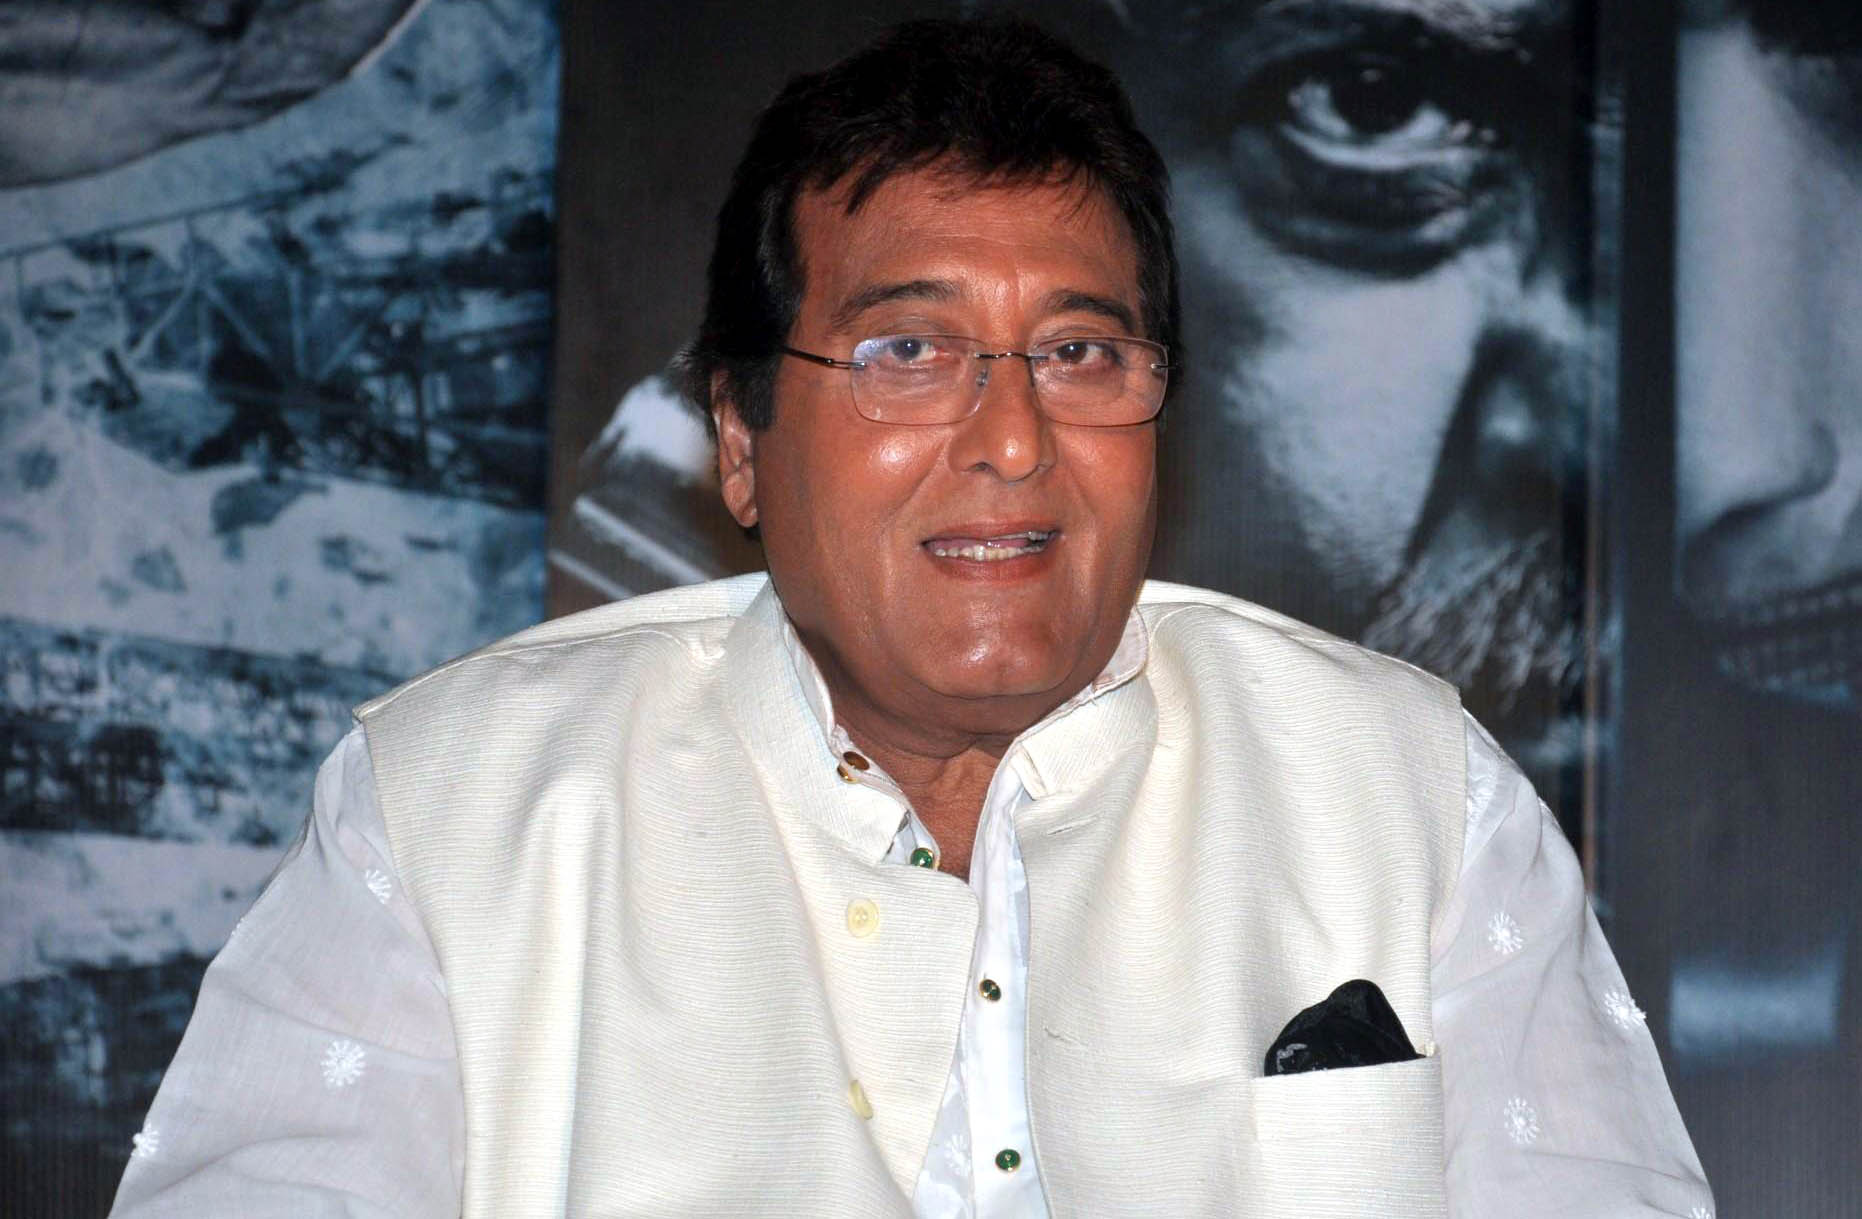 Vinod Khanna, actor and politician, passes away aged 70 of bladder cancer